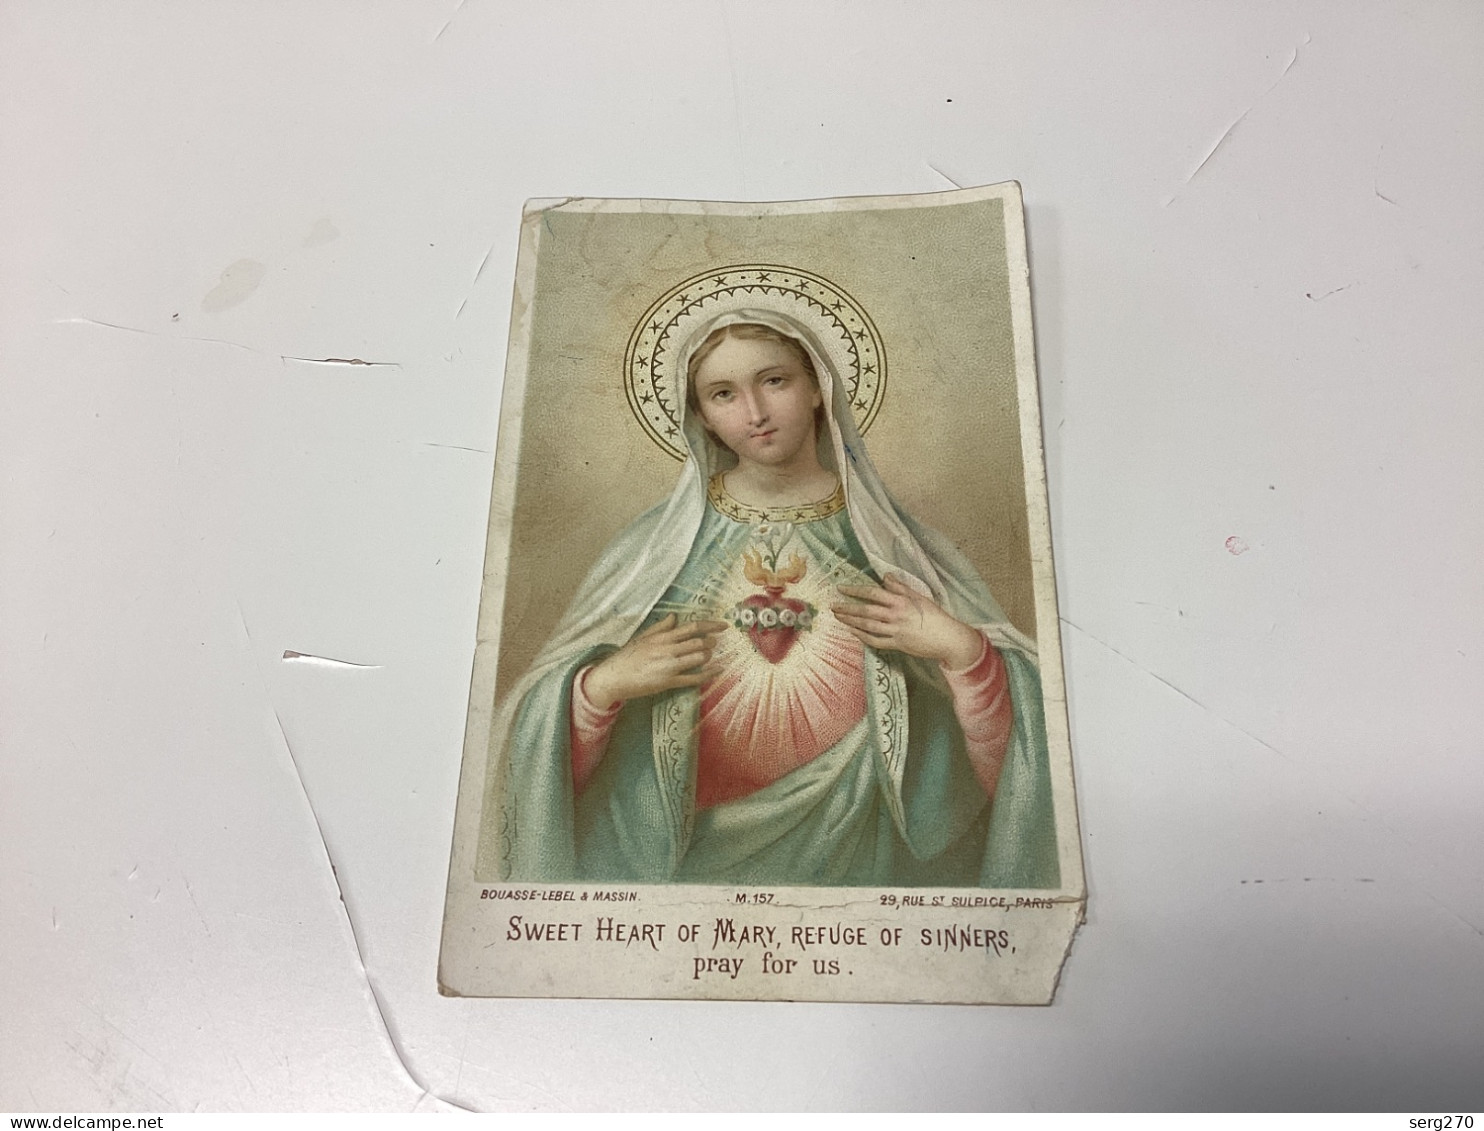 Image Pieuse Image Religieuse 1900 SWEET HEART OF MARY, REFUGE OF SINNERS, Pray For Us. - Devotion Images